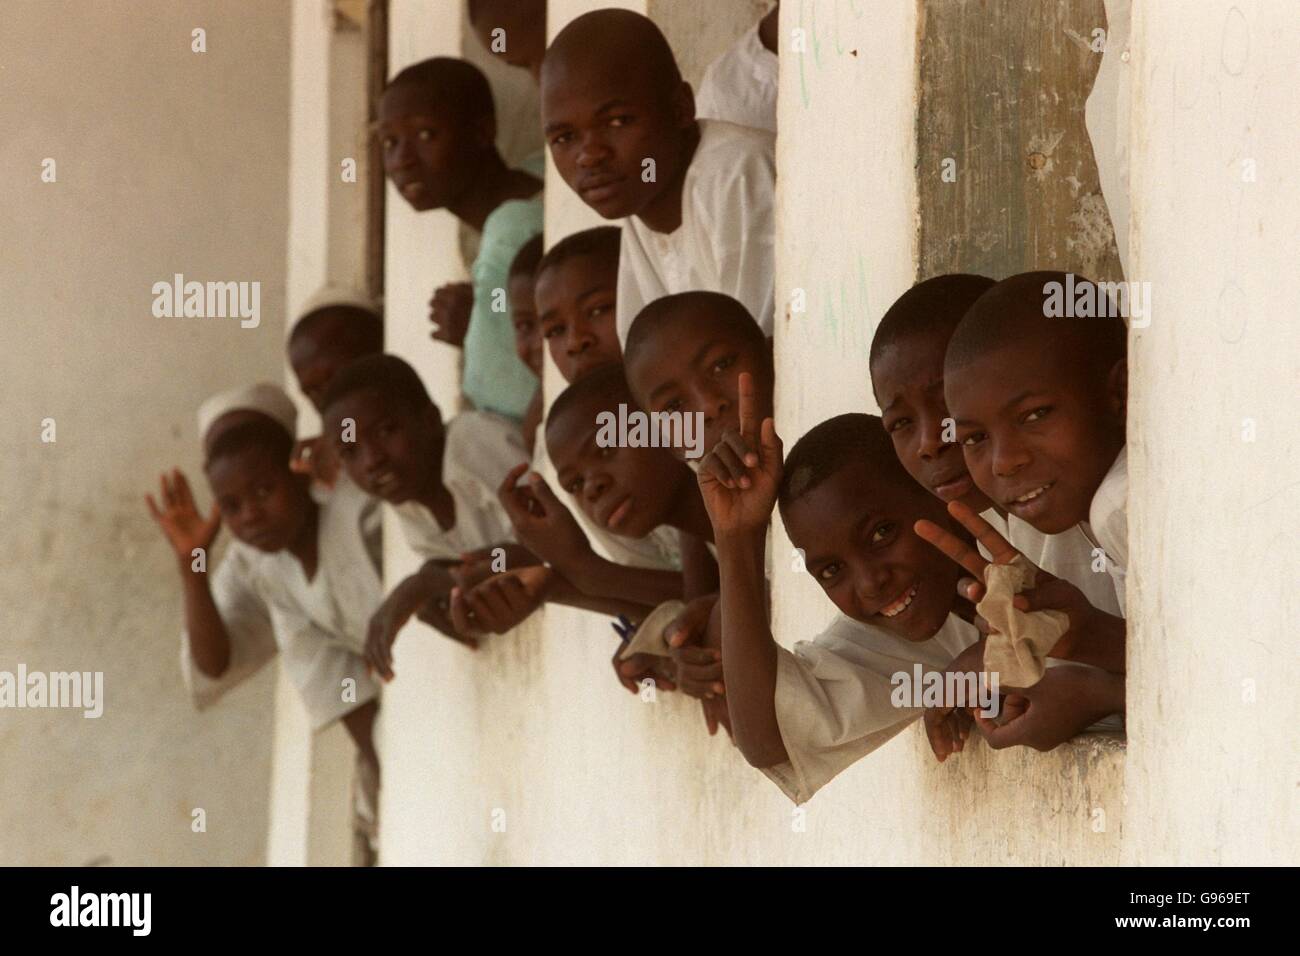 Soccer - FIFA World Youth Championships - Nigeria '99 - England Day Out. Nigerian children lean out of windows to catch a glimpse of the England team Stock Photo